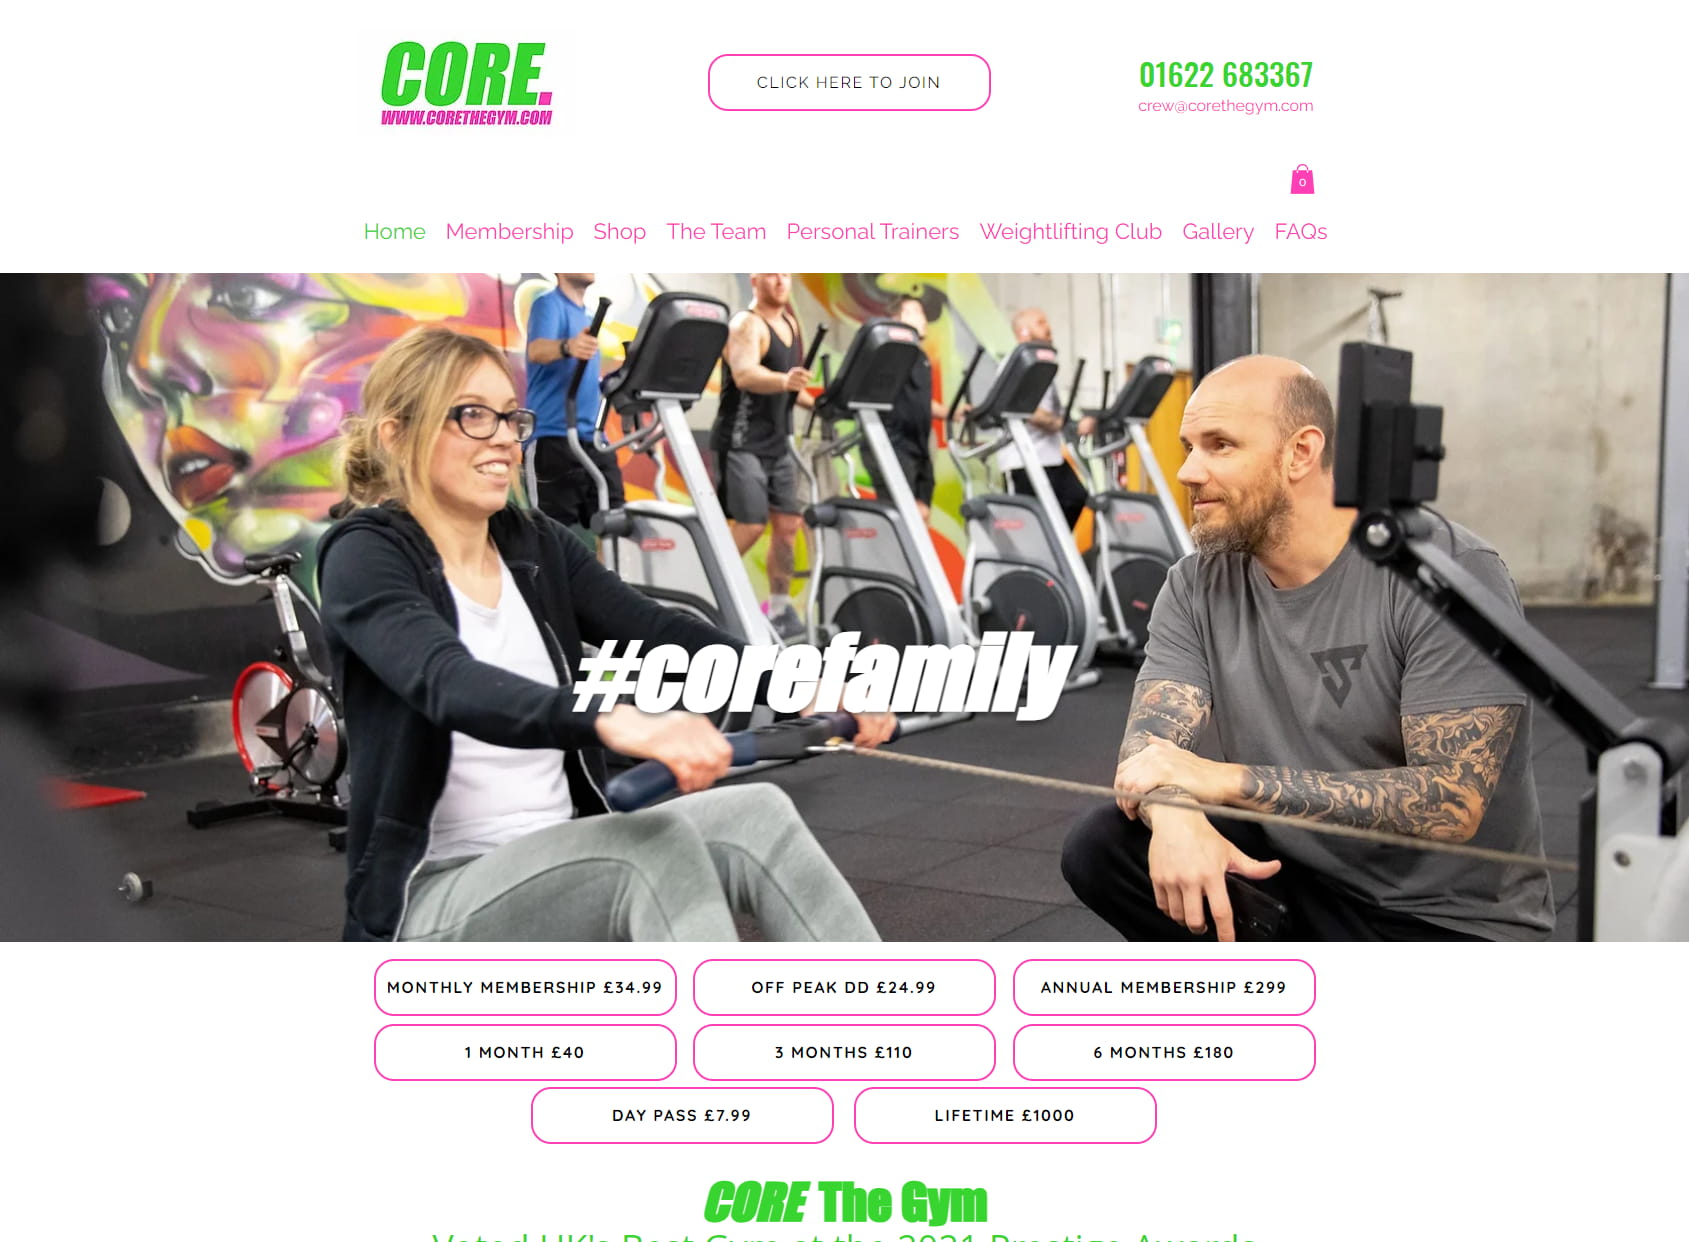 Core The Gym